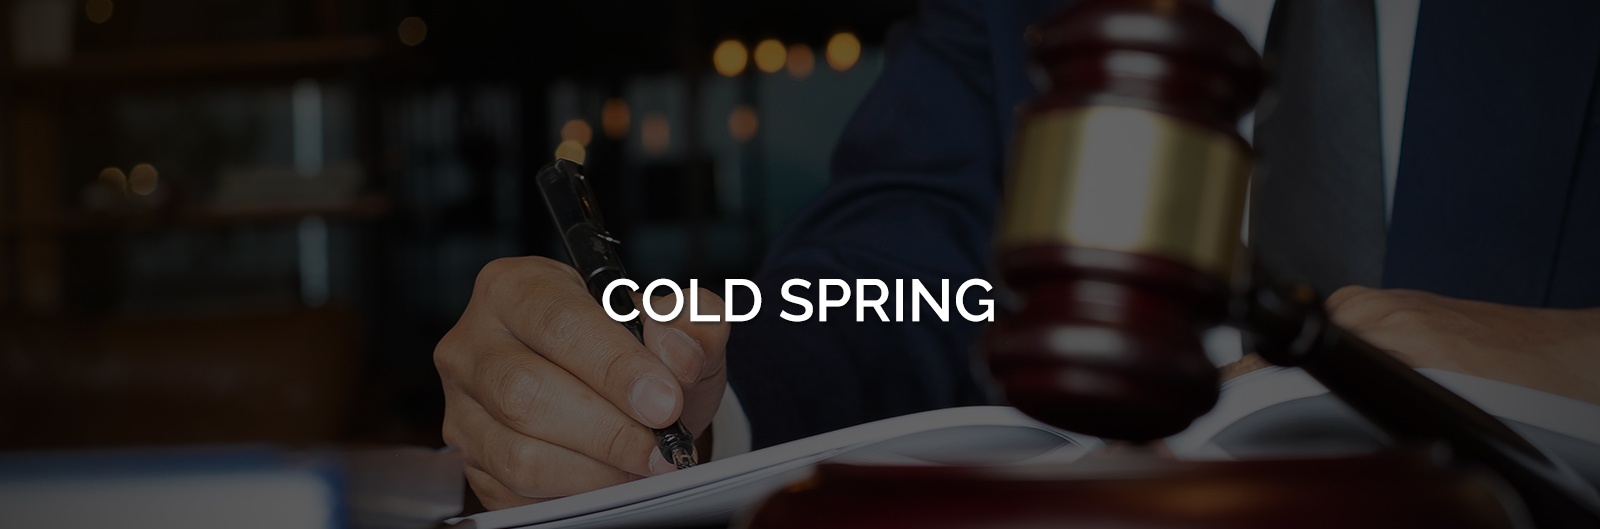 Cold-spring